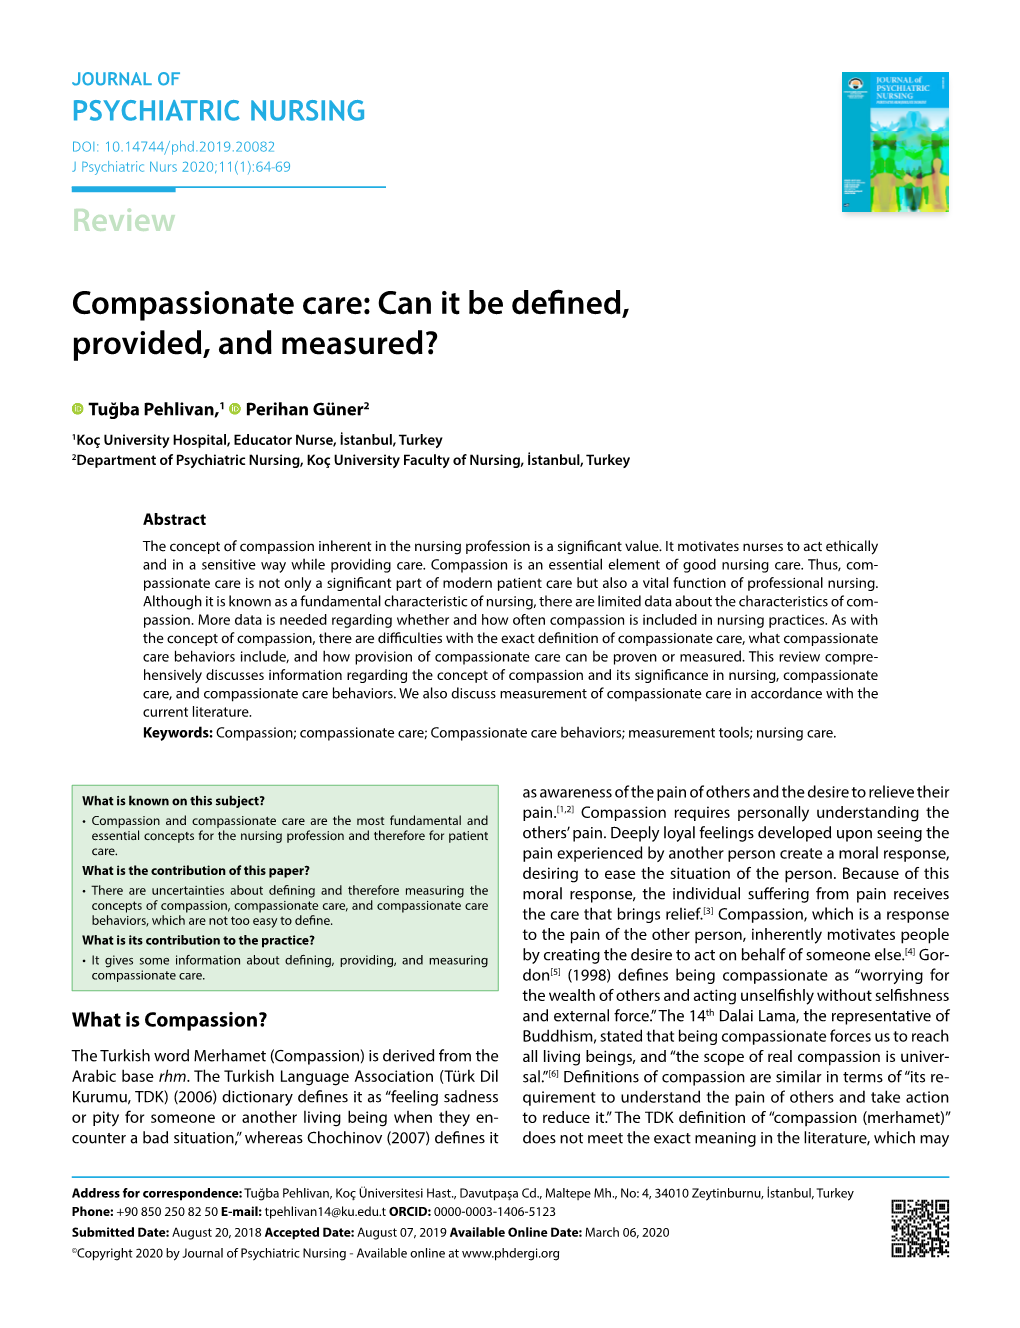 Review Compassionate Care: Can It Be Defined, Provided, and Measured?